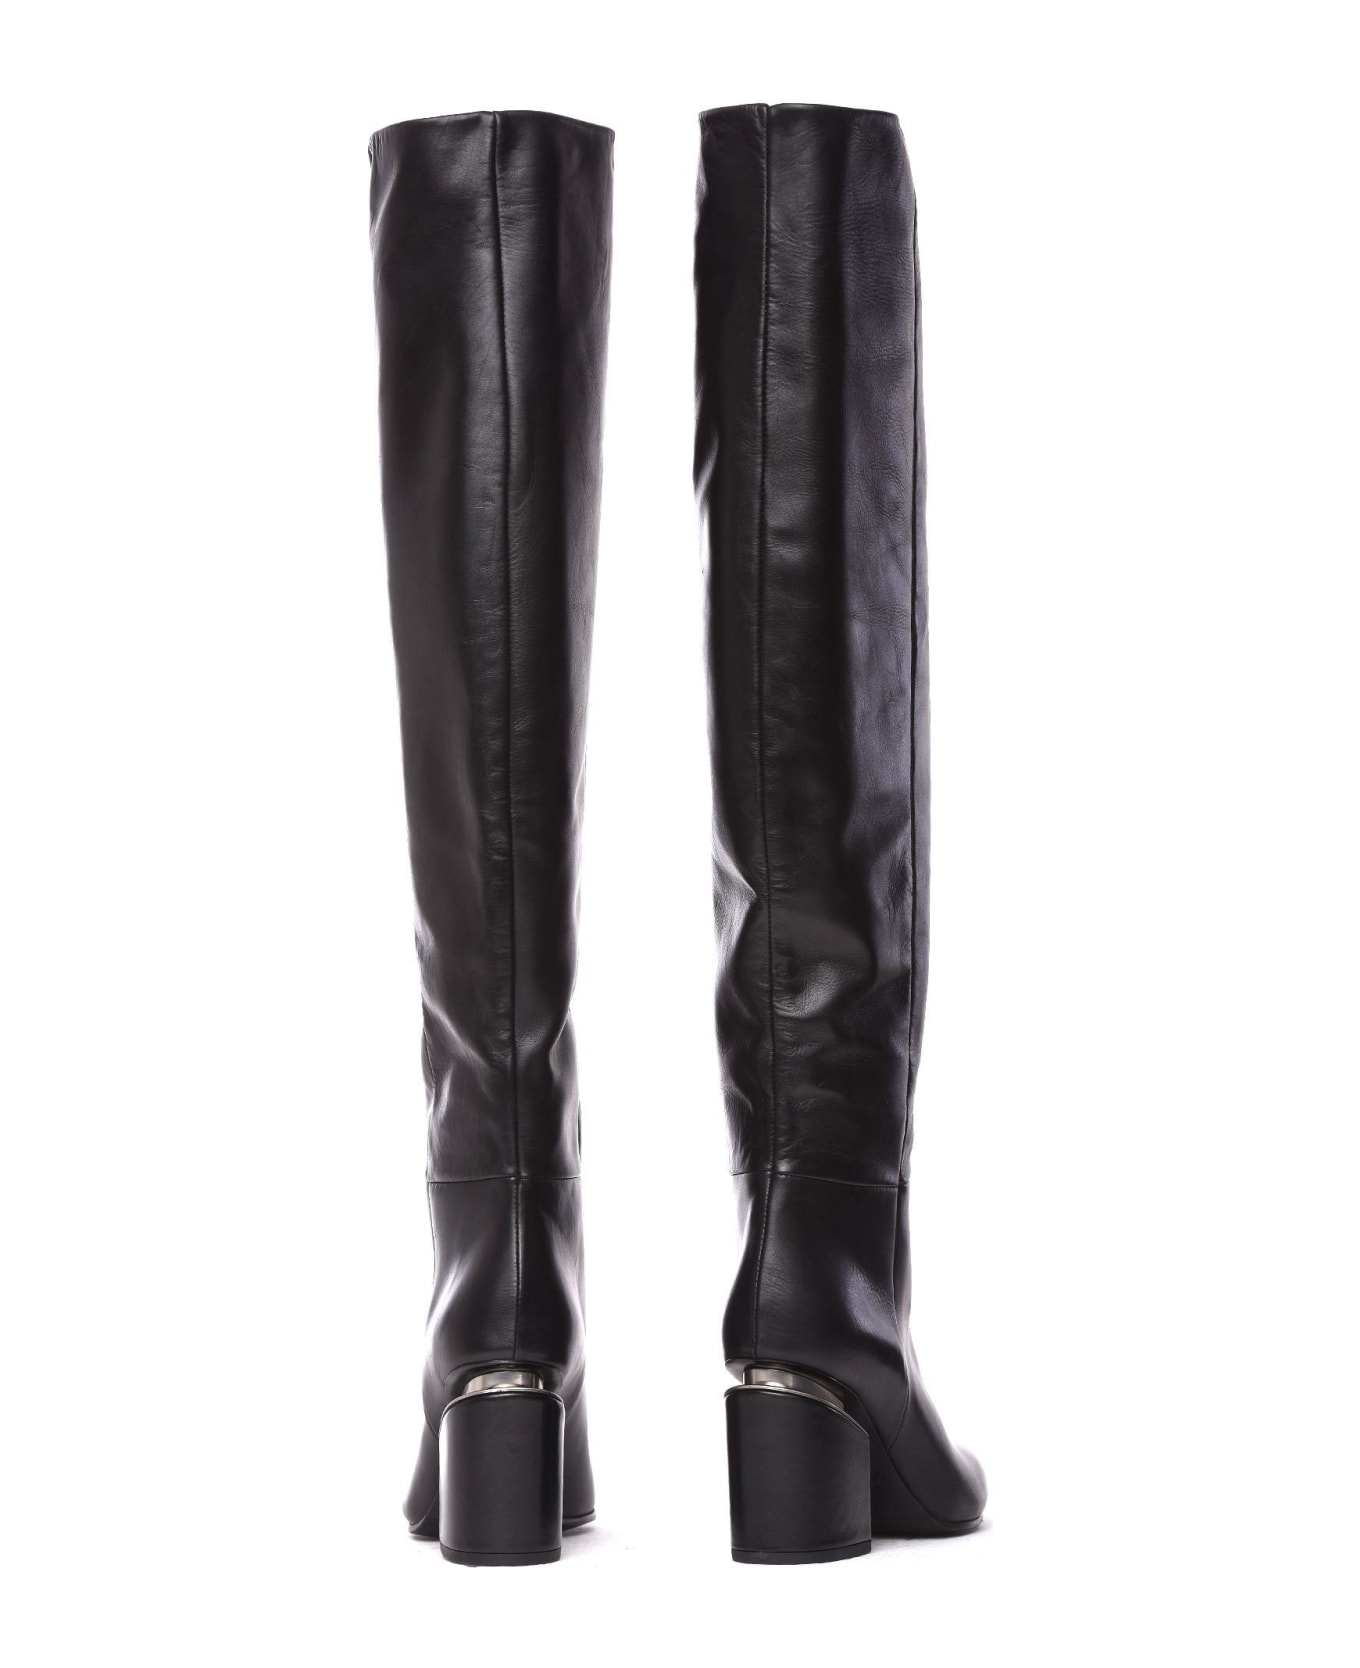 Vic Matié Black Leather Stove Pipe Boots With Suspended Heel | italist ...